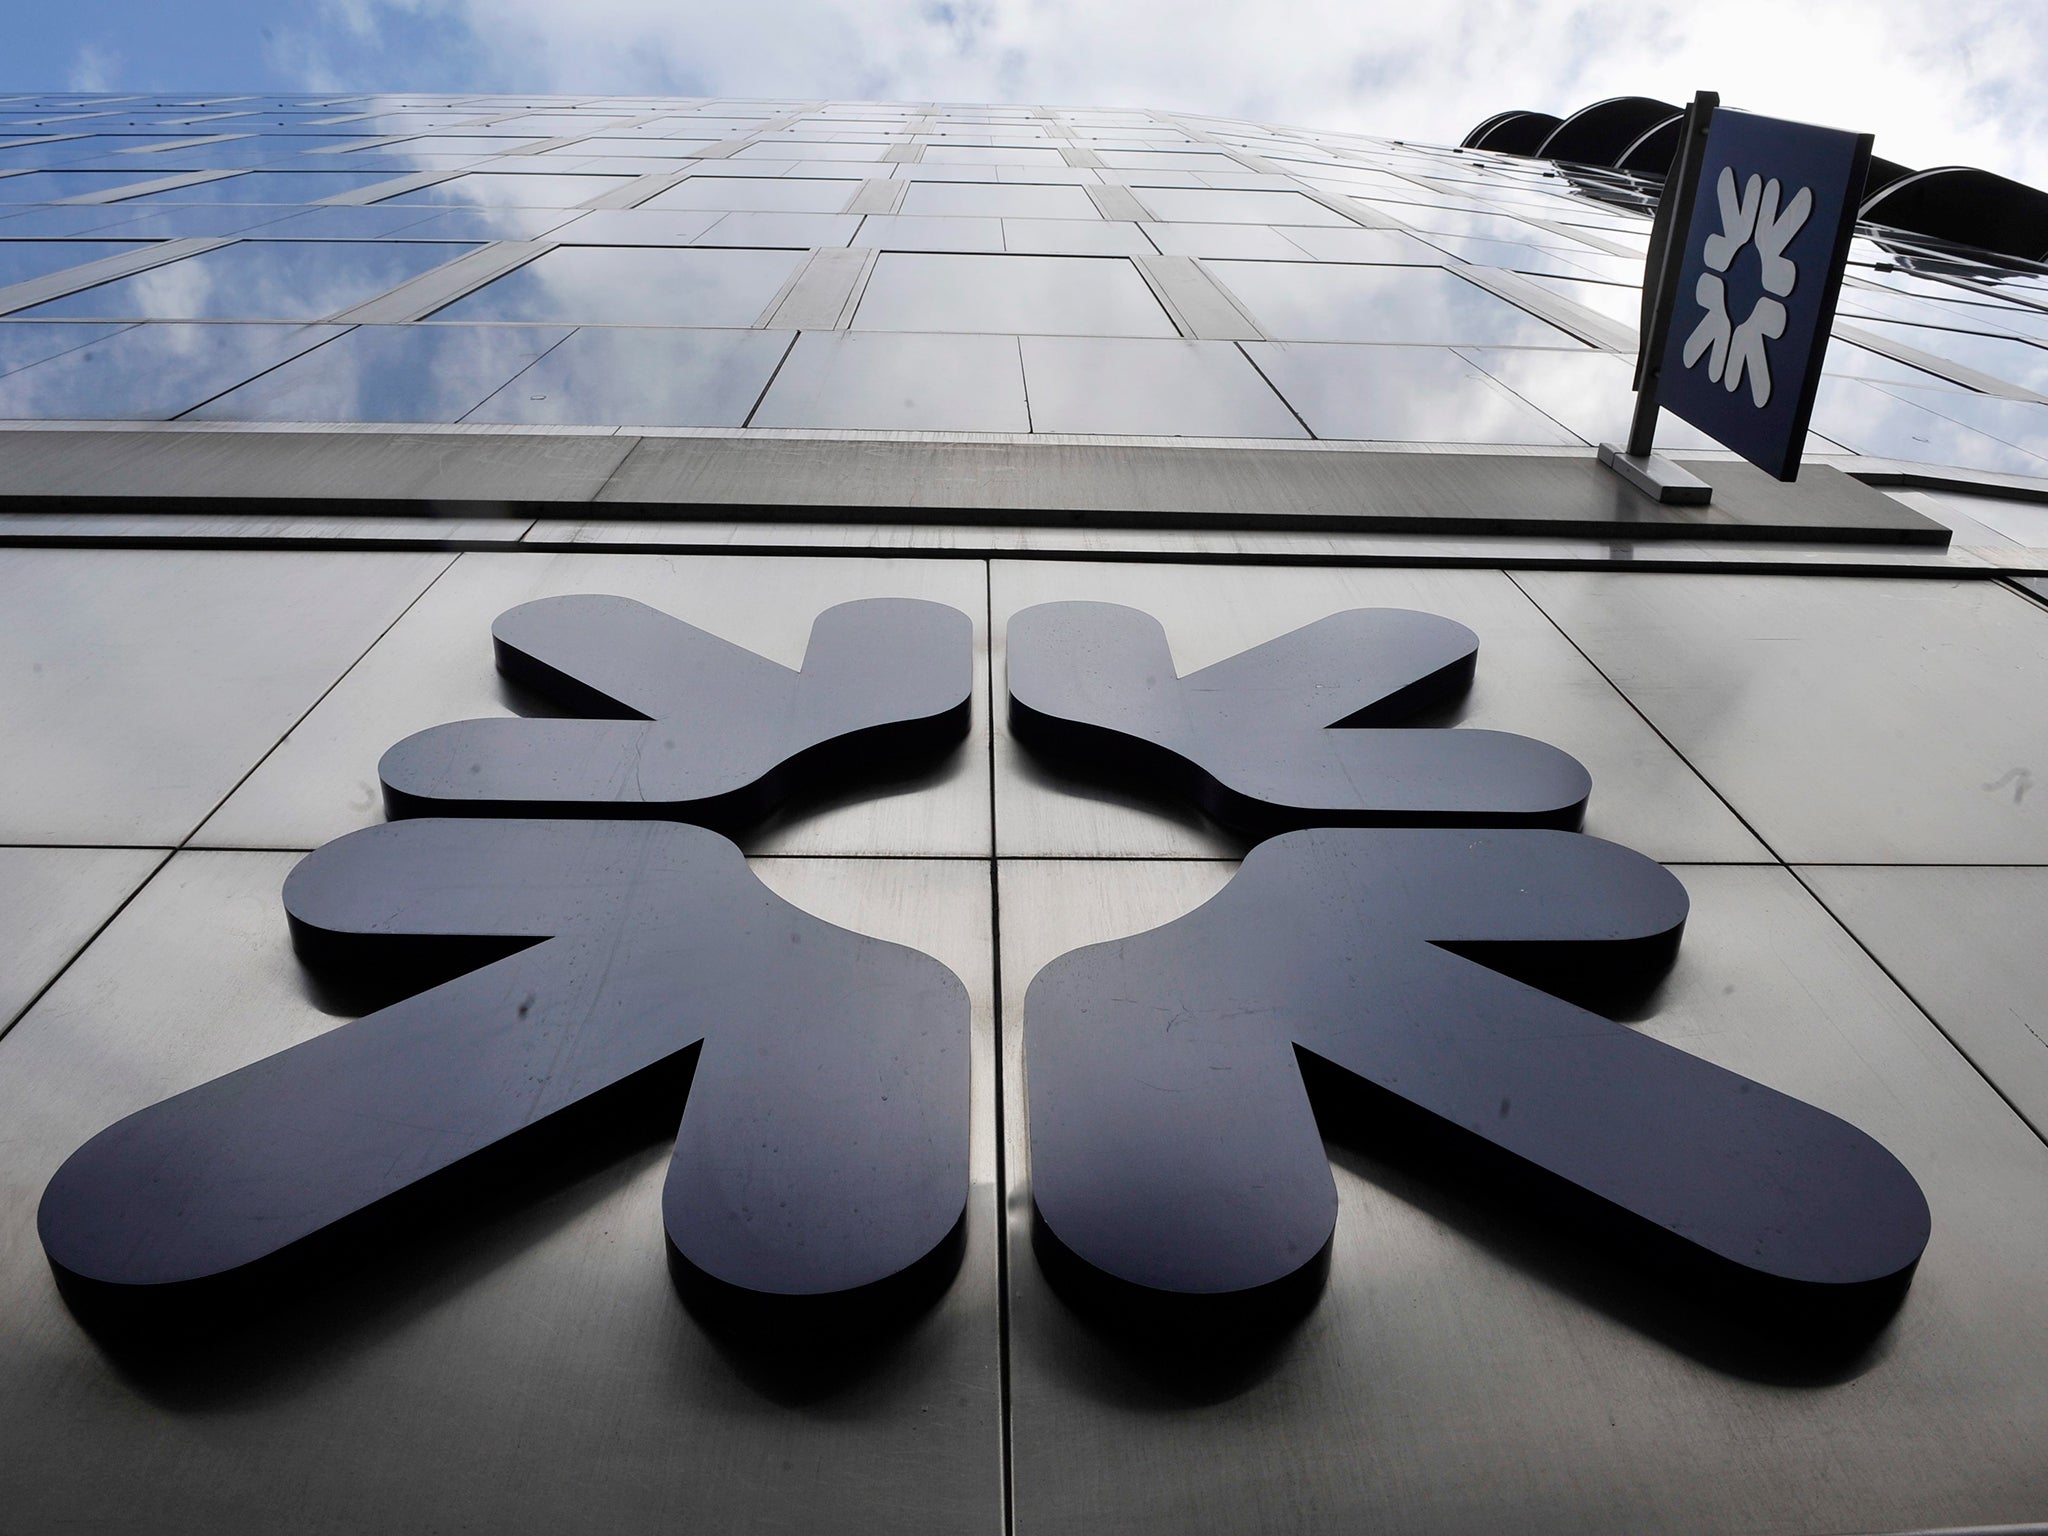 RBS to report a loss in 2015 after setting aside more money for mistakes